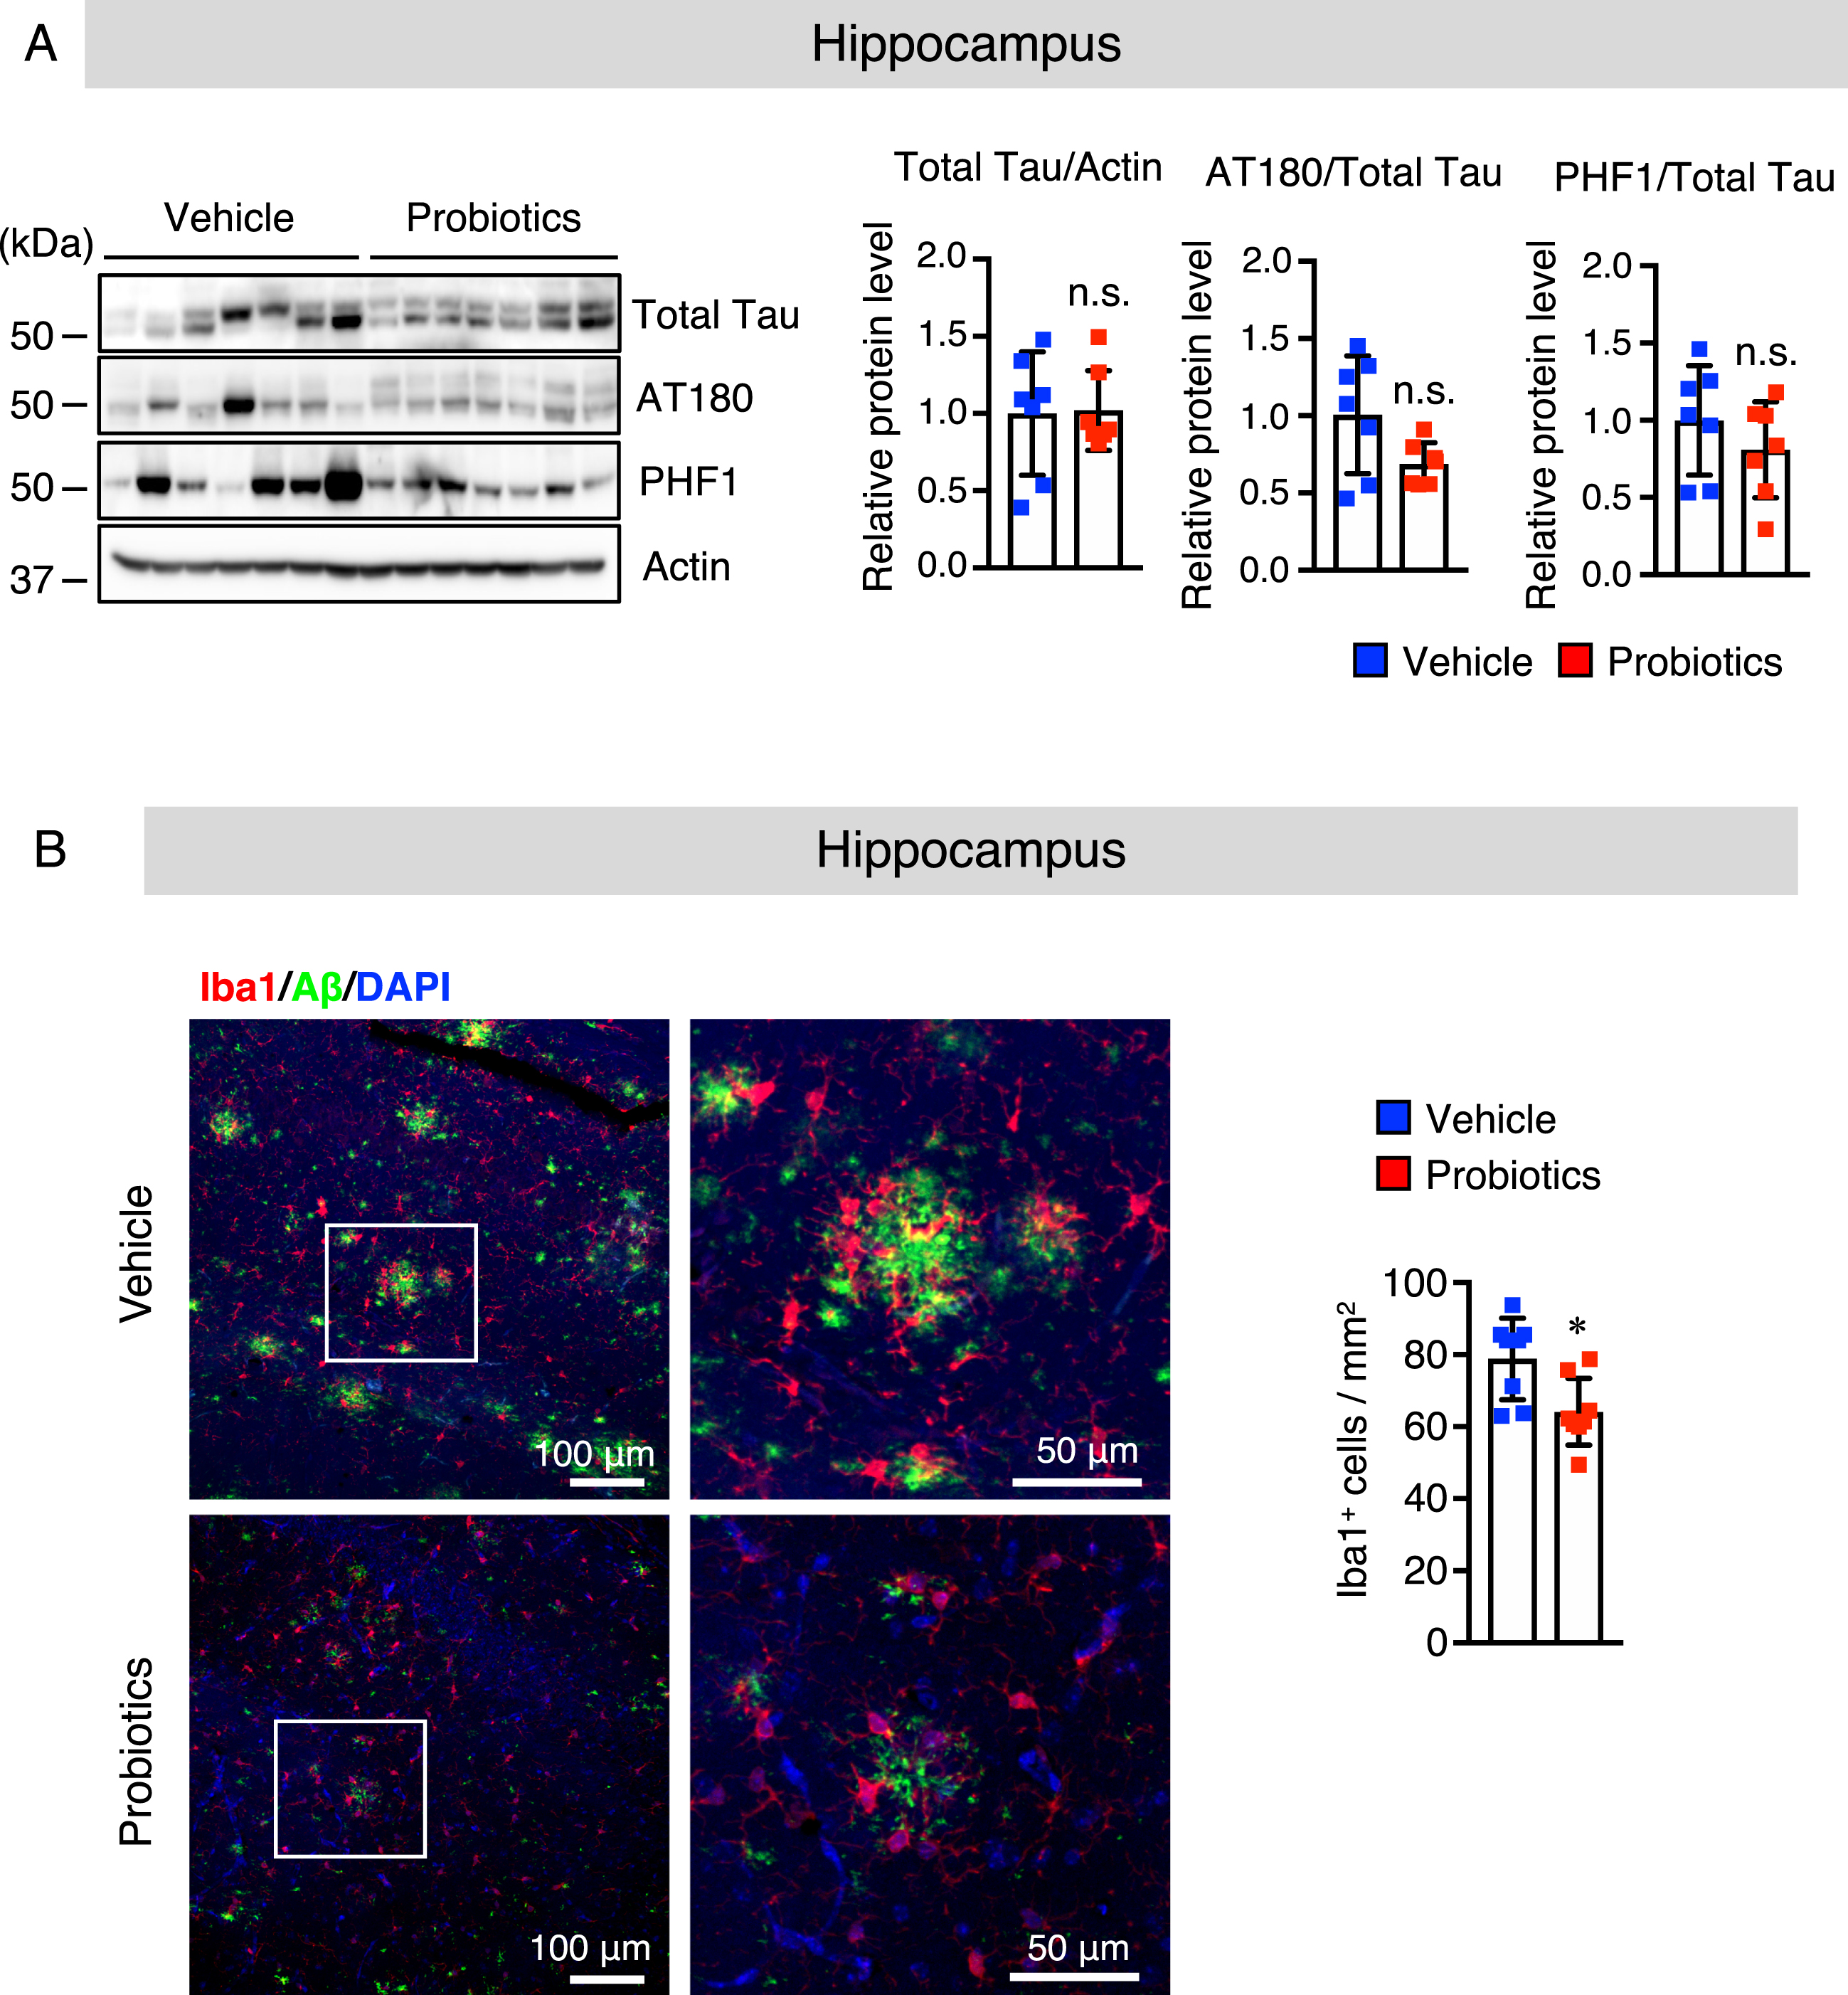 B. breve MCC1274 supplementation does not affect the phosphorylation of tau and attenuates microglial activation in the hippocampus of AppNL-G-F mice. A) The protein levels of total Tau, AT180 (p-Thr23), PHF1 (p-Ser369/Ser404), and actin in the hippocampus were determined by western blot analysis, quantified by densitometry, normalized to actin level, and expressed as a value relative to the control. B) Brain sections were stained with the anti-Iba1 (red) and anti-Aβ (green) antibodies, and cell nuclei were stained with DAPI (blue). Representative images of the hippocampus (left panel). Highly magnified images of the squared region in the left panels are shown in the adjacent right panels. Numbers of Iba1-positive cells (right panel) in the hippocampus. Data are expressed as the mean±SD, n = 6-7, *p < 0.05 compared with the vehicle group, n.s., no significant difference as determined by Student’s t-test.